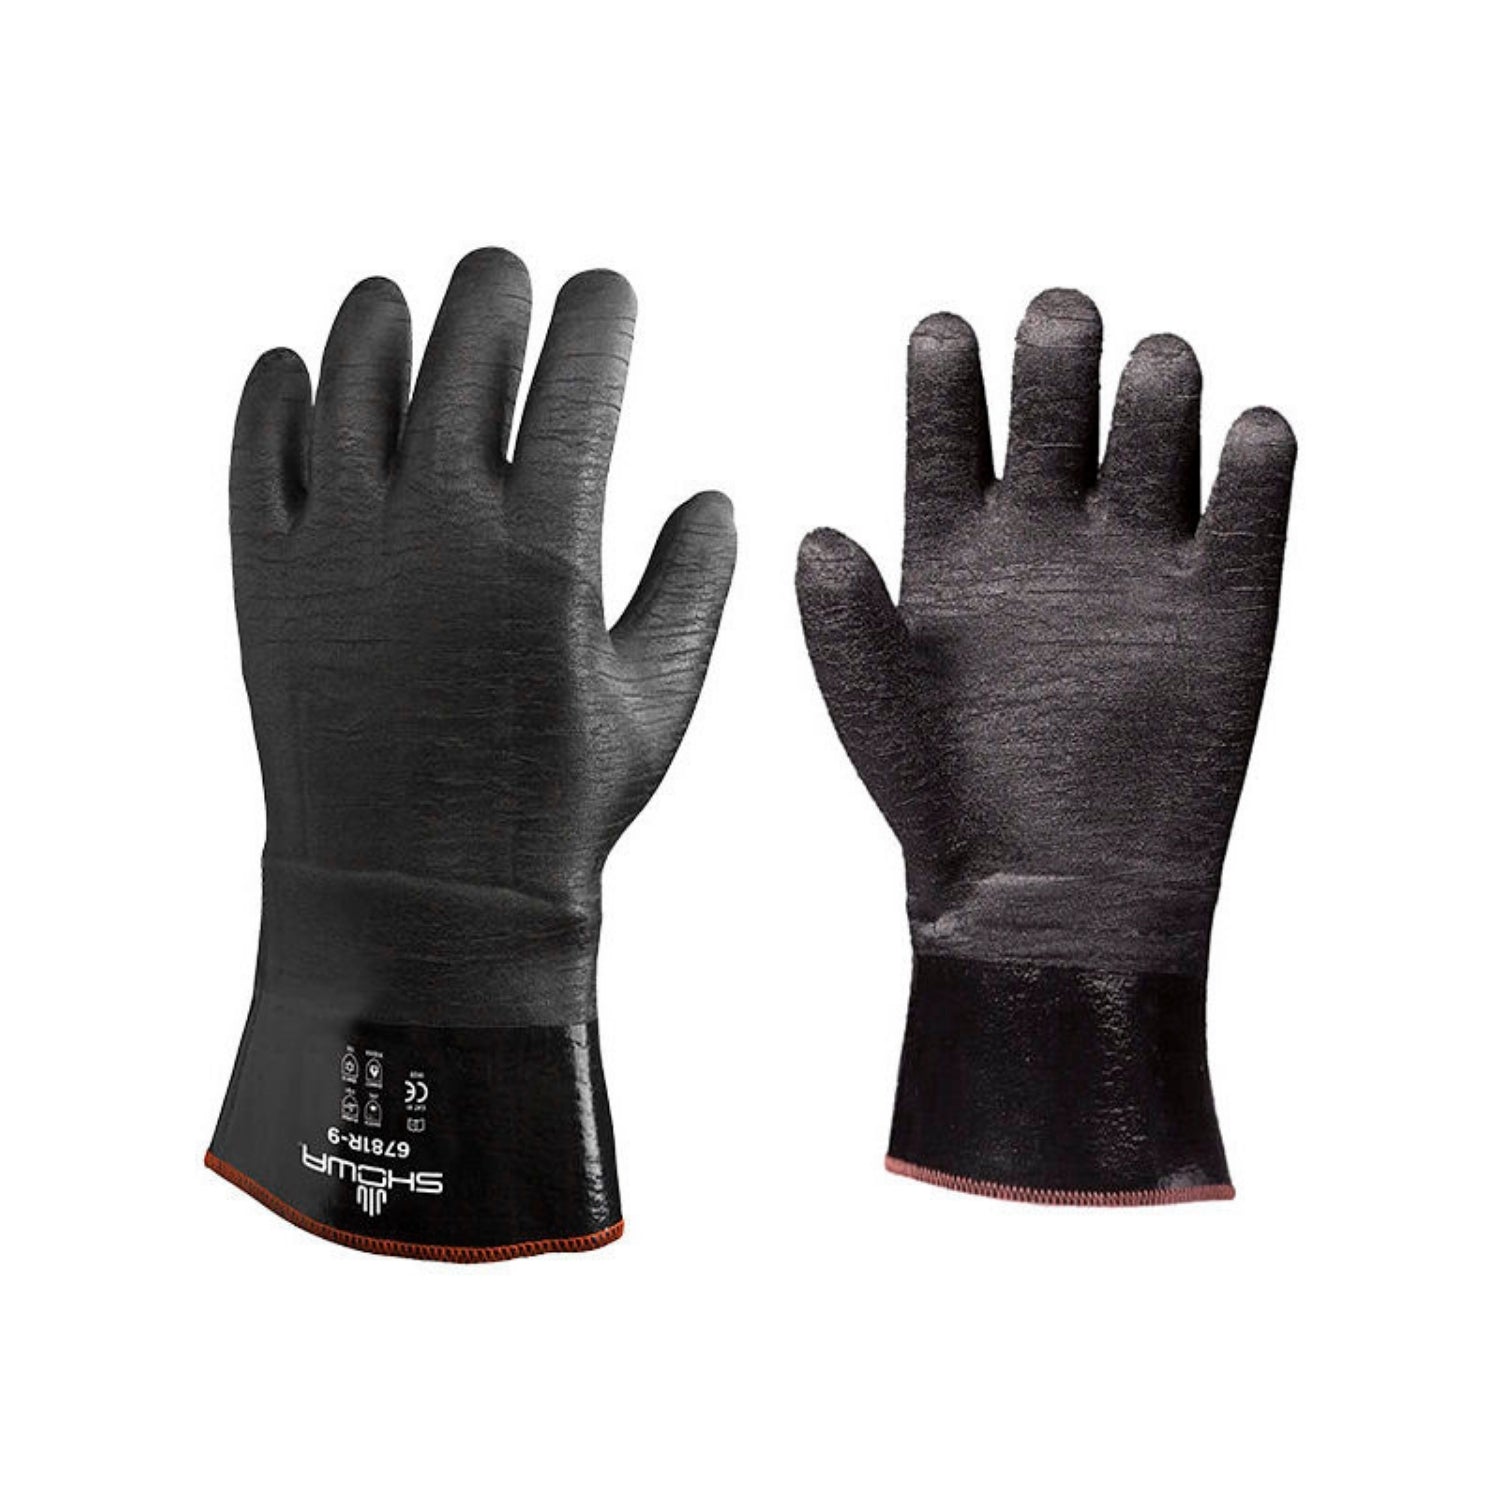 SHOWA 6781R - Chemical Protection Gloves